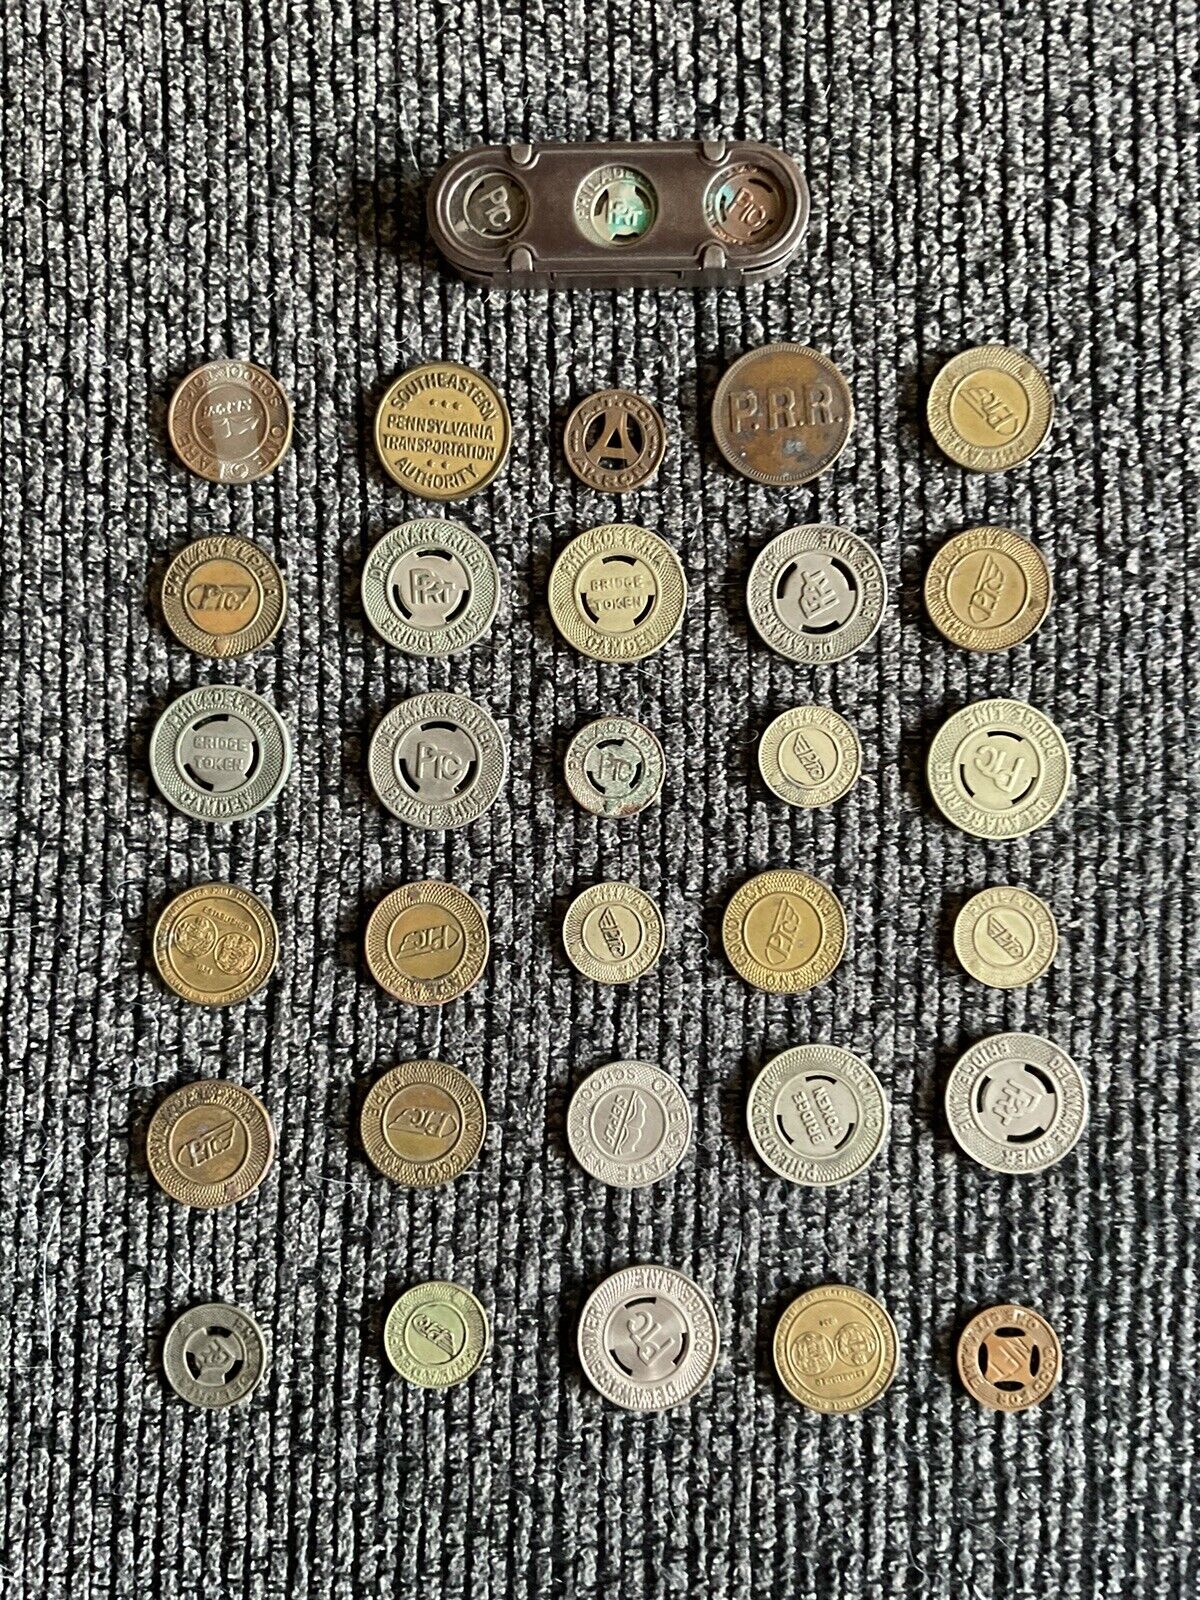 Collectible Junk Drawer Coin Lot Transit Holder W/ Tokens 